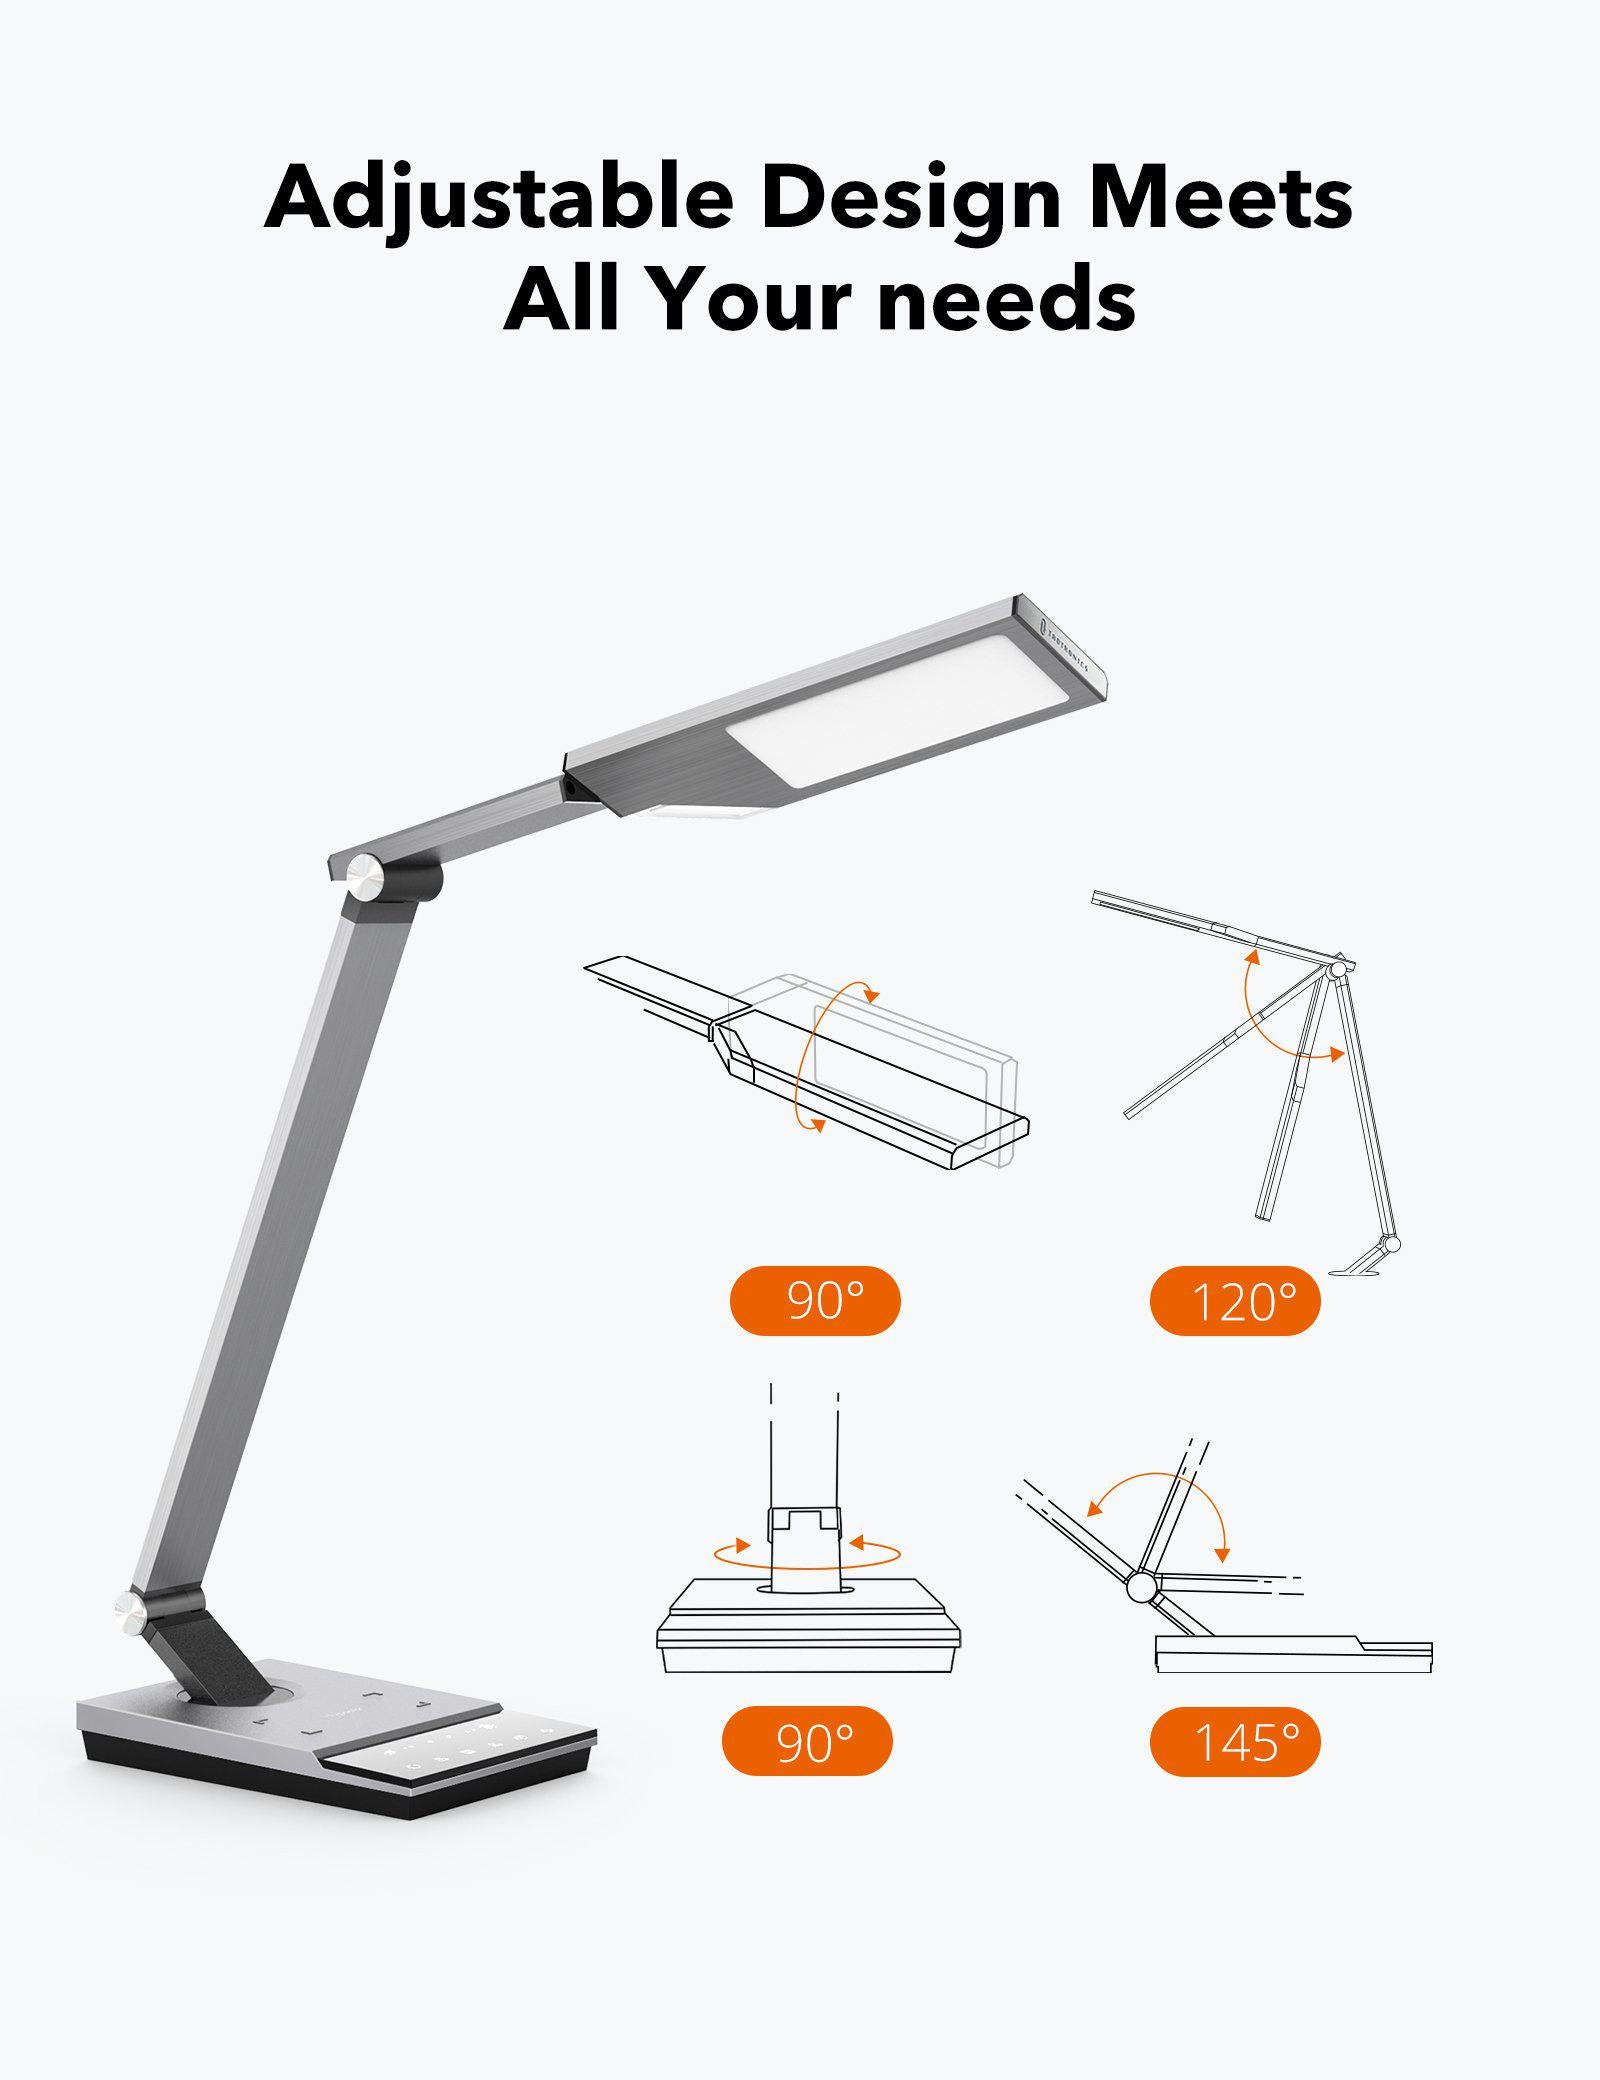 LED Desk Lamp with Fast Wireless Charger&5V/2A USB Port-TaoTronics